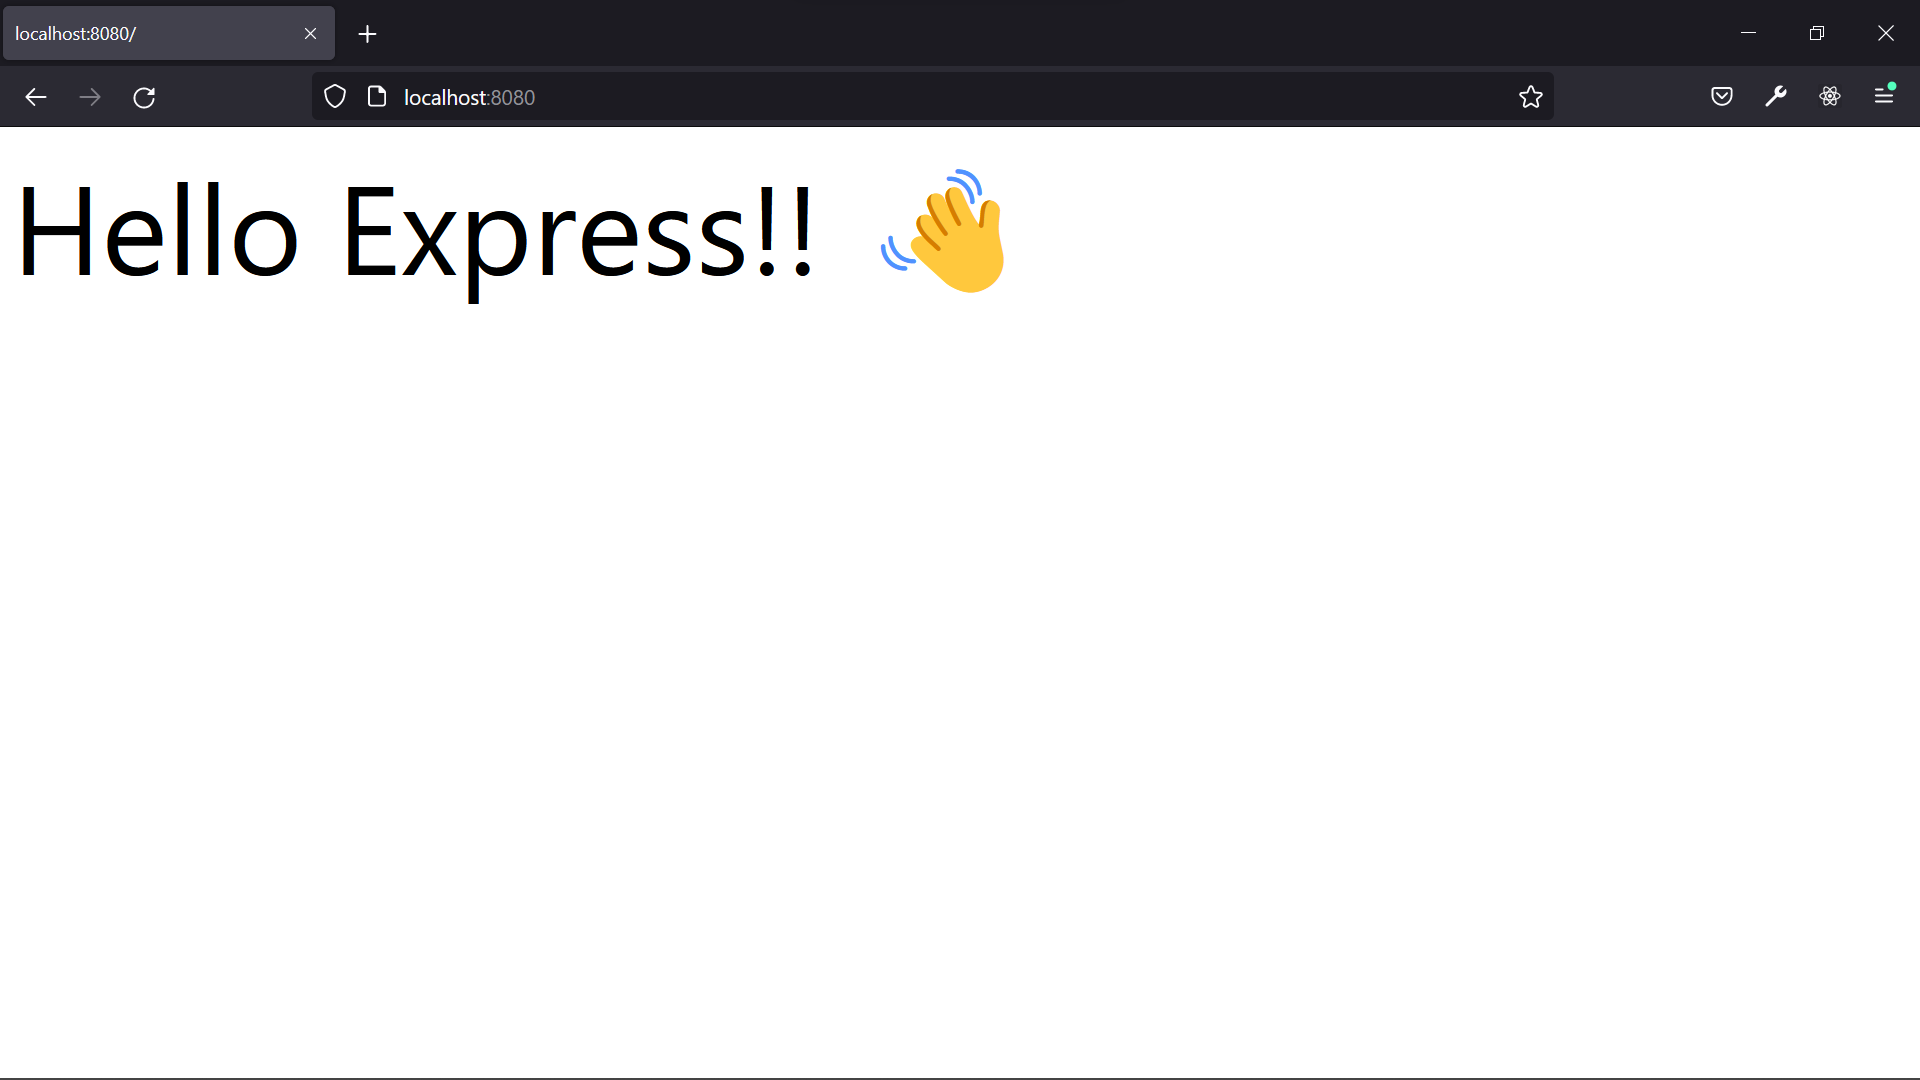 Image showing the message “Hello Express 👋” in the browser